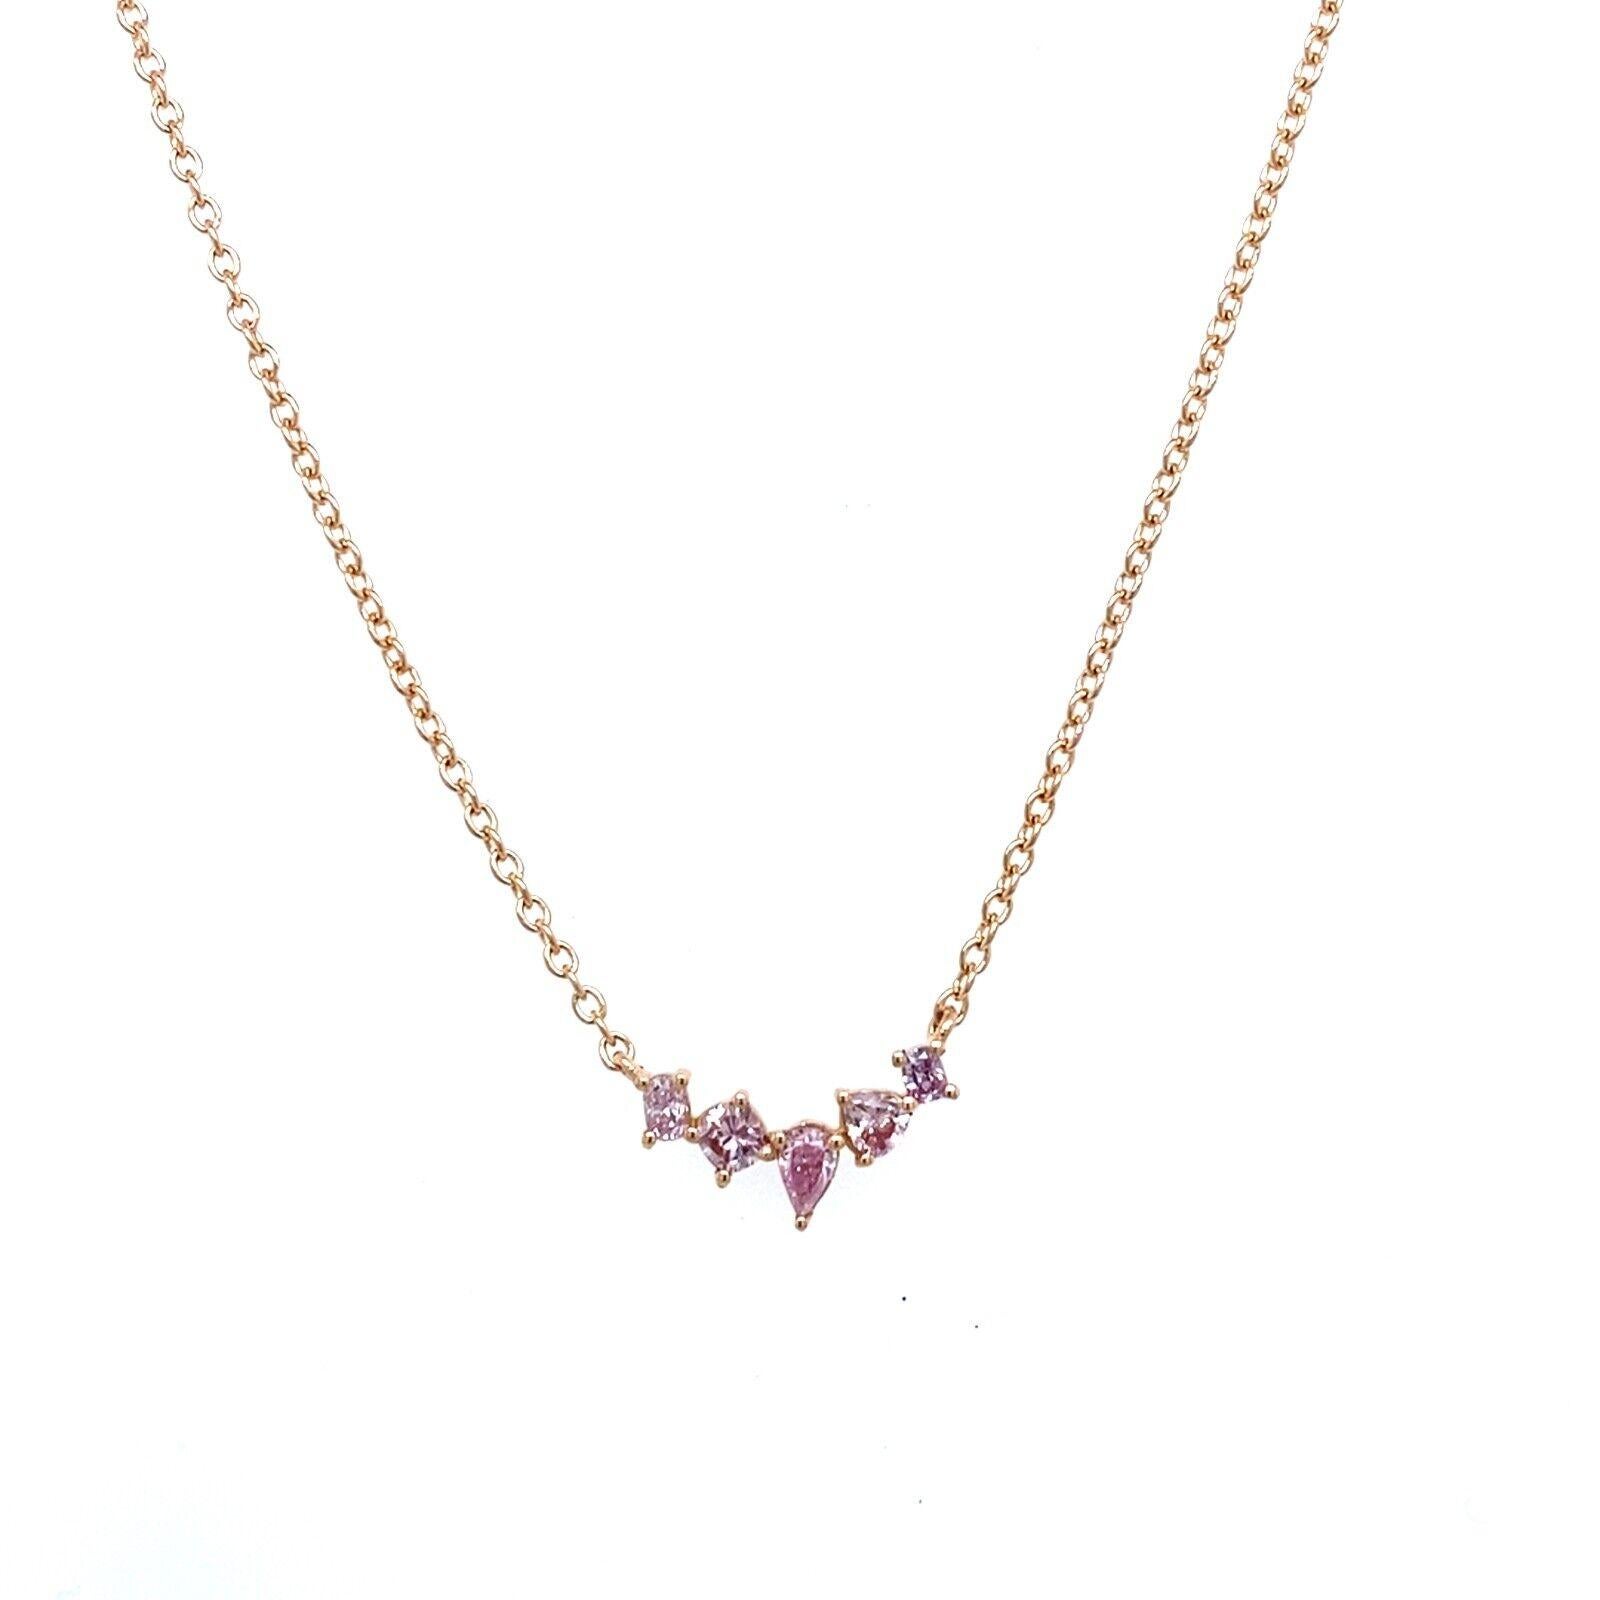 This elegant Diamond necklace on a 18ct Yellow Gold chain features five pink intense Diamonds. Each stone is set in a prong setting and the chain is made of 18ct Yellow Gold. The necklace is a great gift for an anniversary or birthday.

Additional